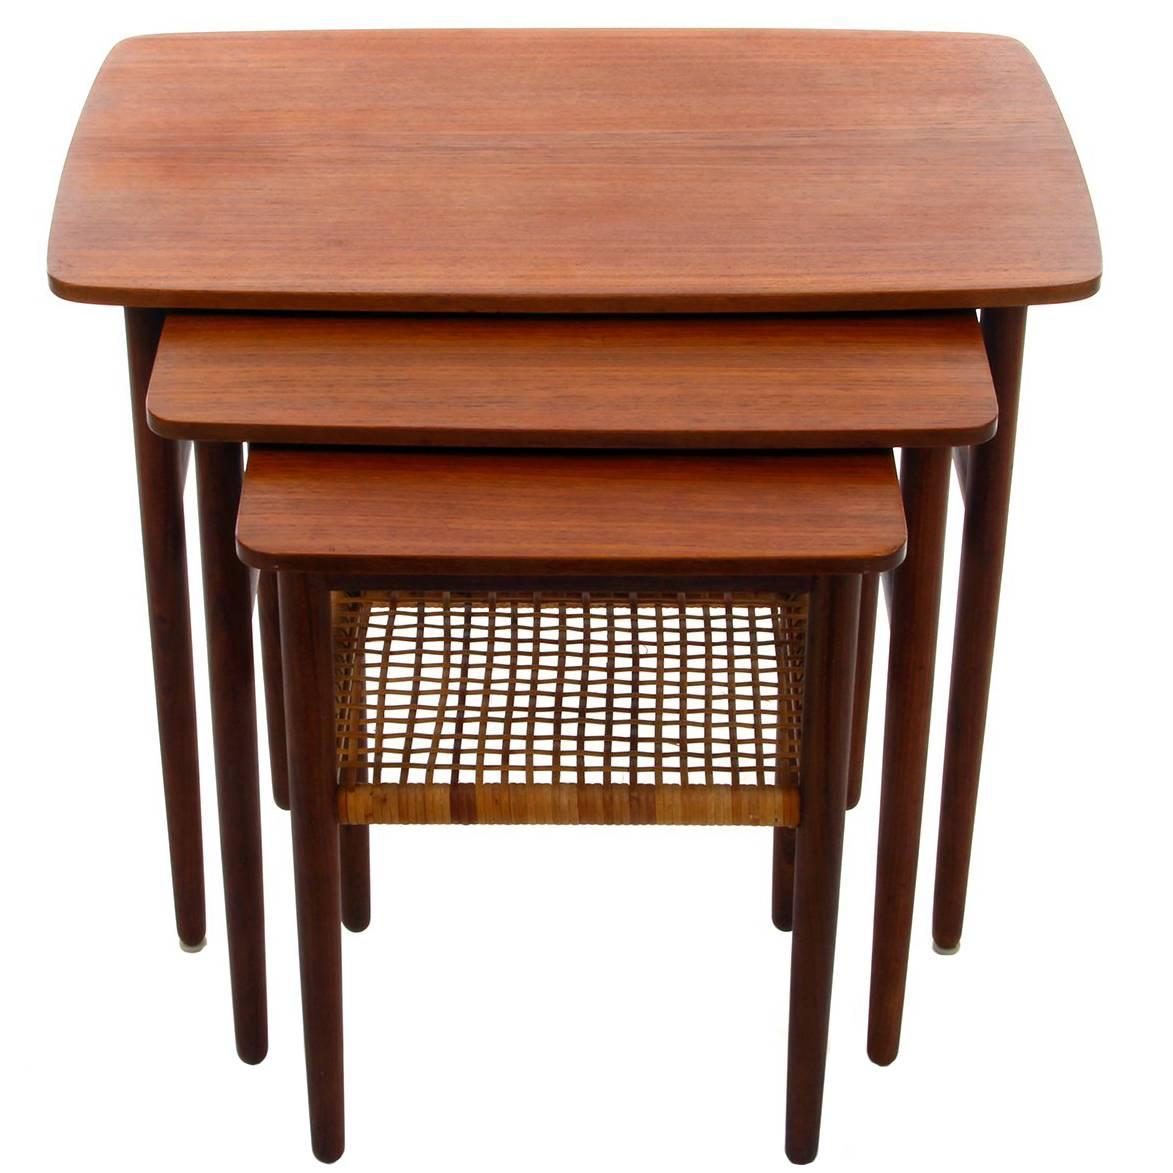 Teak and Rosewood Nesting Tables, 1950s, Danish Mid-Century Modern Nested Tables